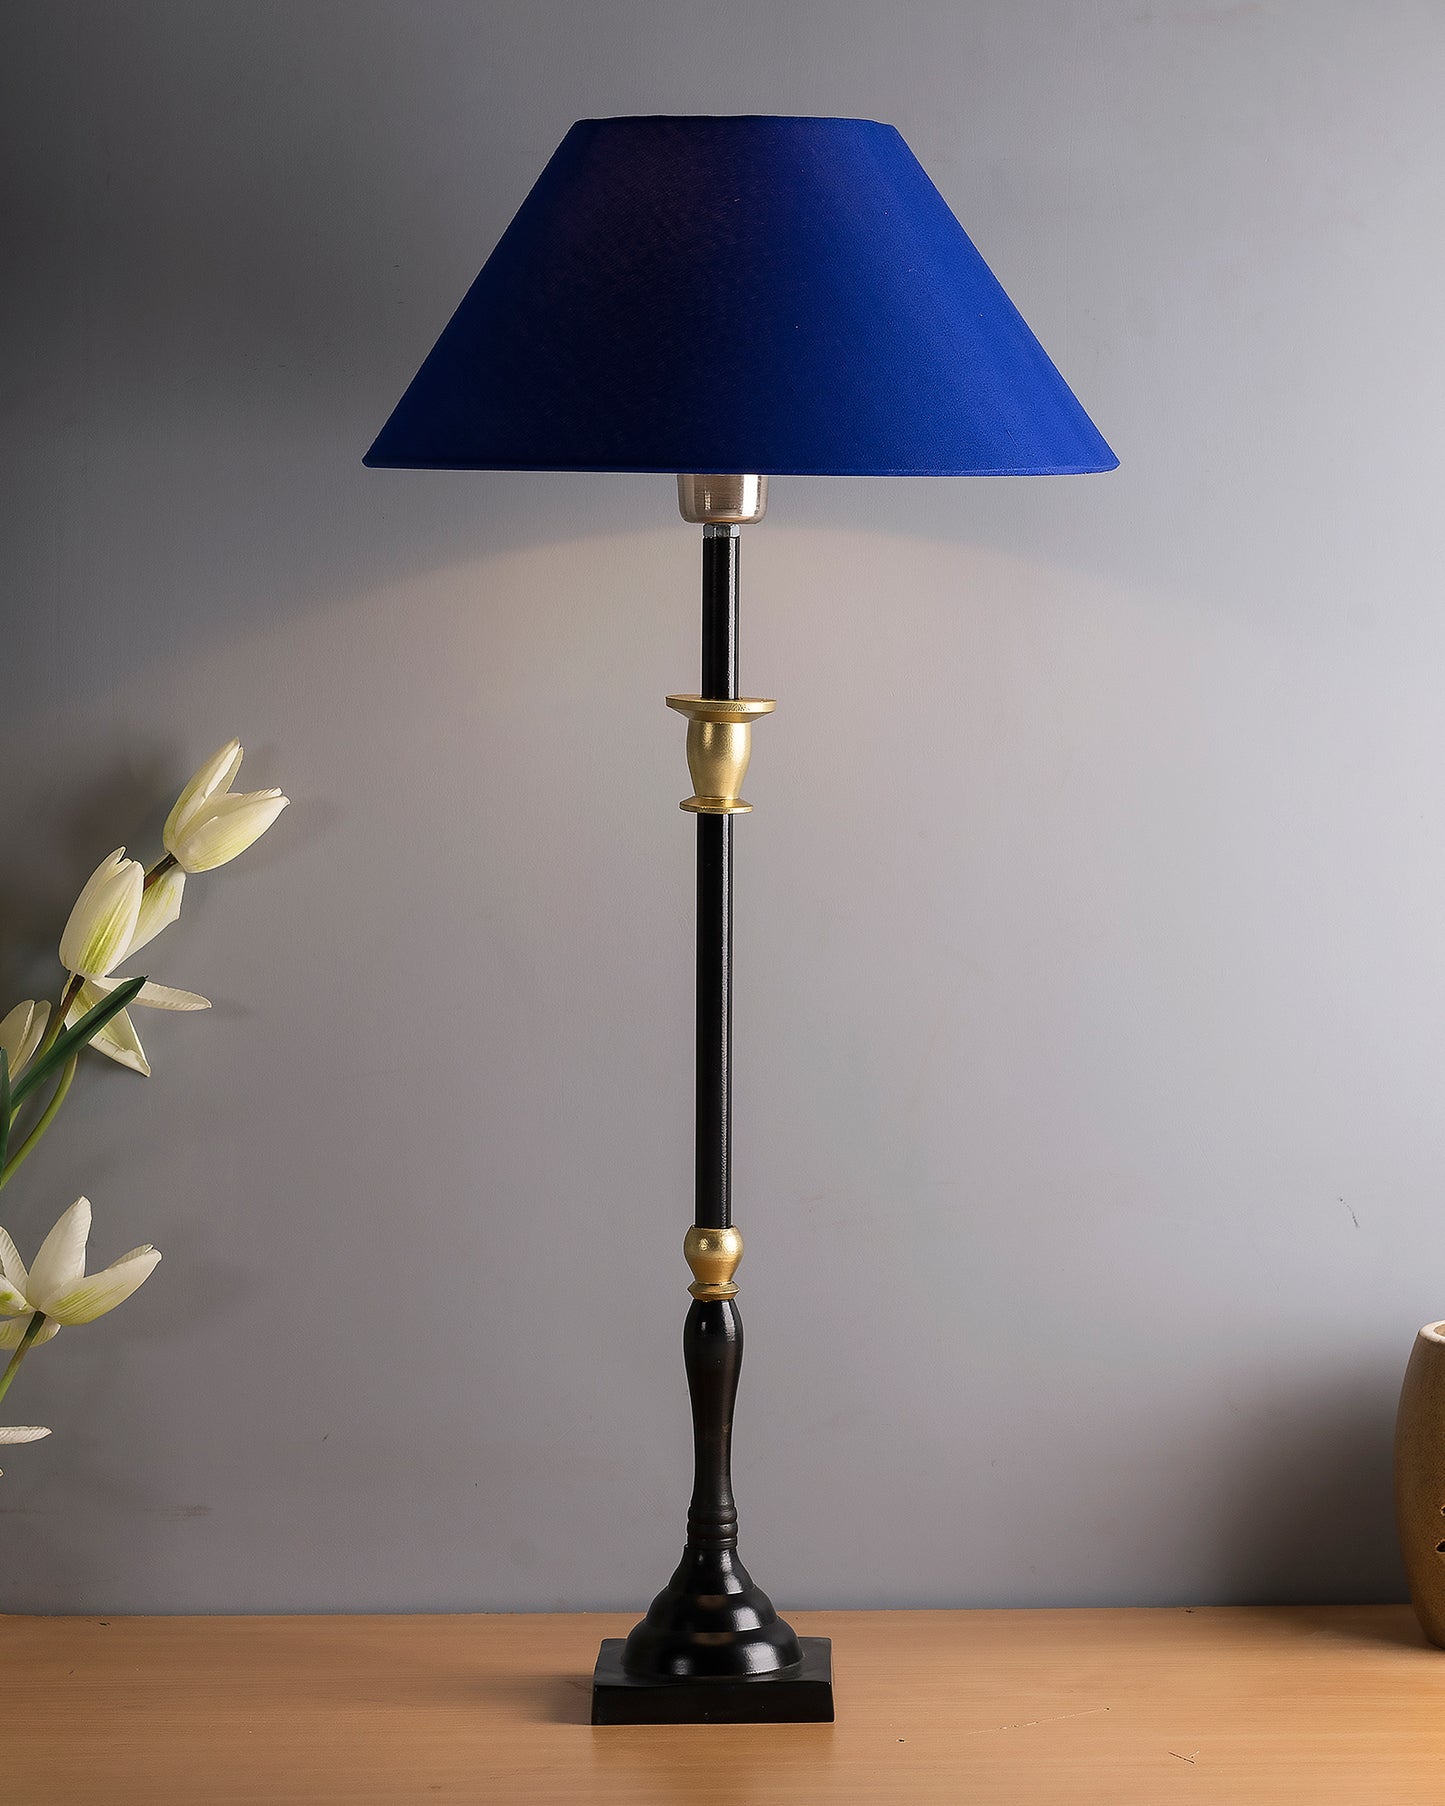 Classic Imperial Black Golden Candlestick Table Lamp, Cone Shade